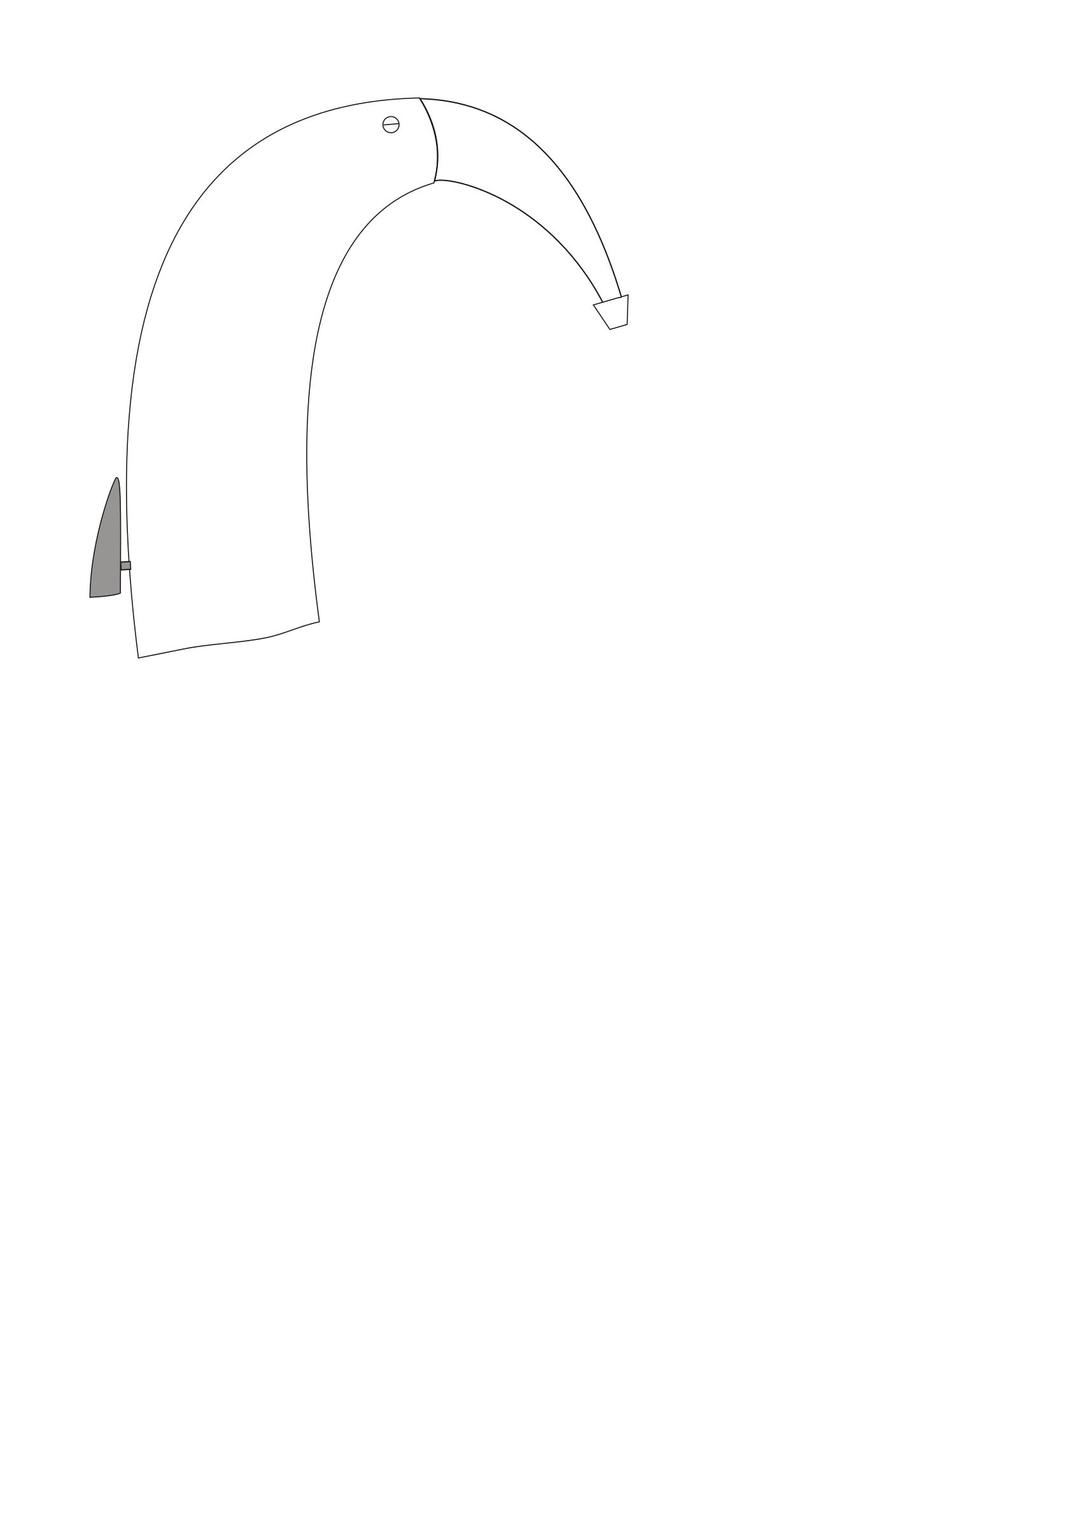 Hearing Aid png transparent